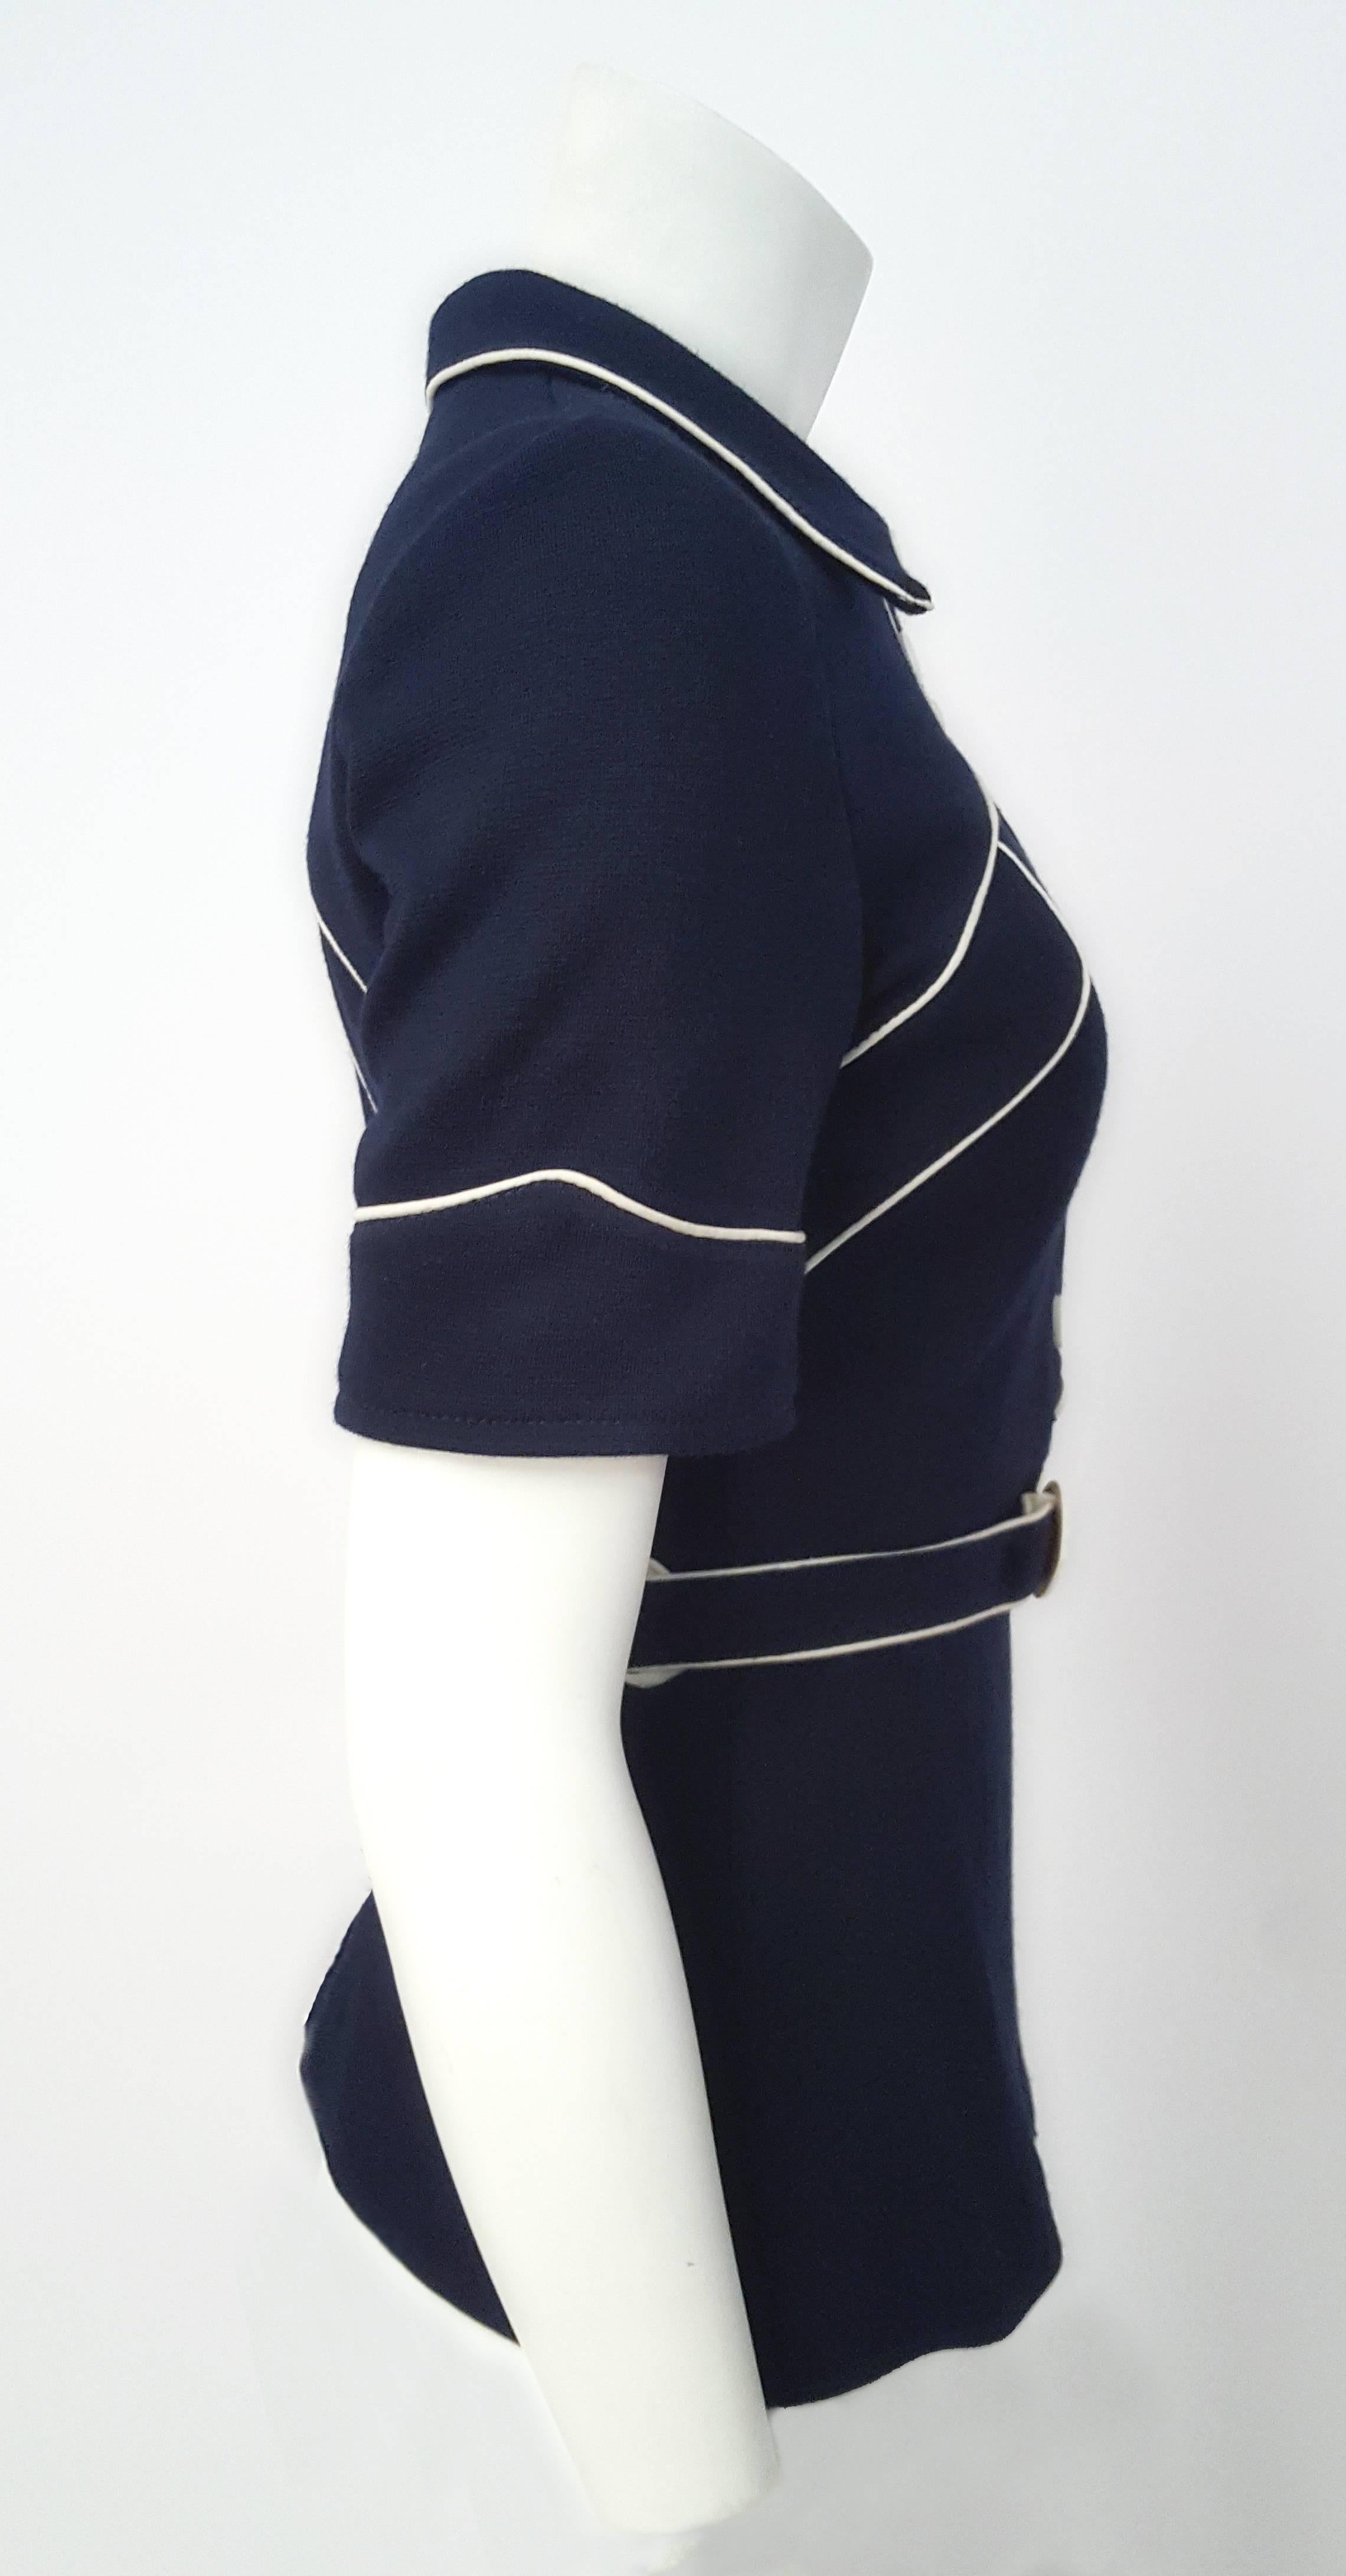 60s Navy Blue Knit Top w/ White Piping. Front button closure. Original belt. Slight fading at lining shown in photo. 